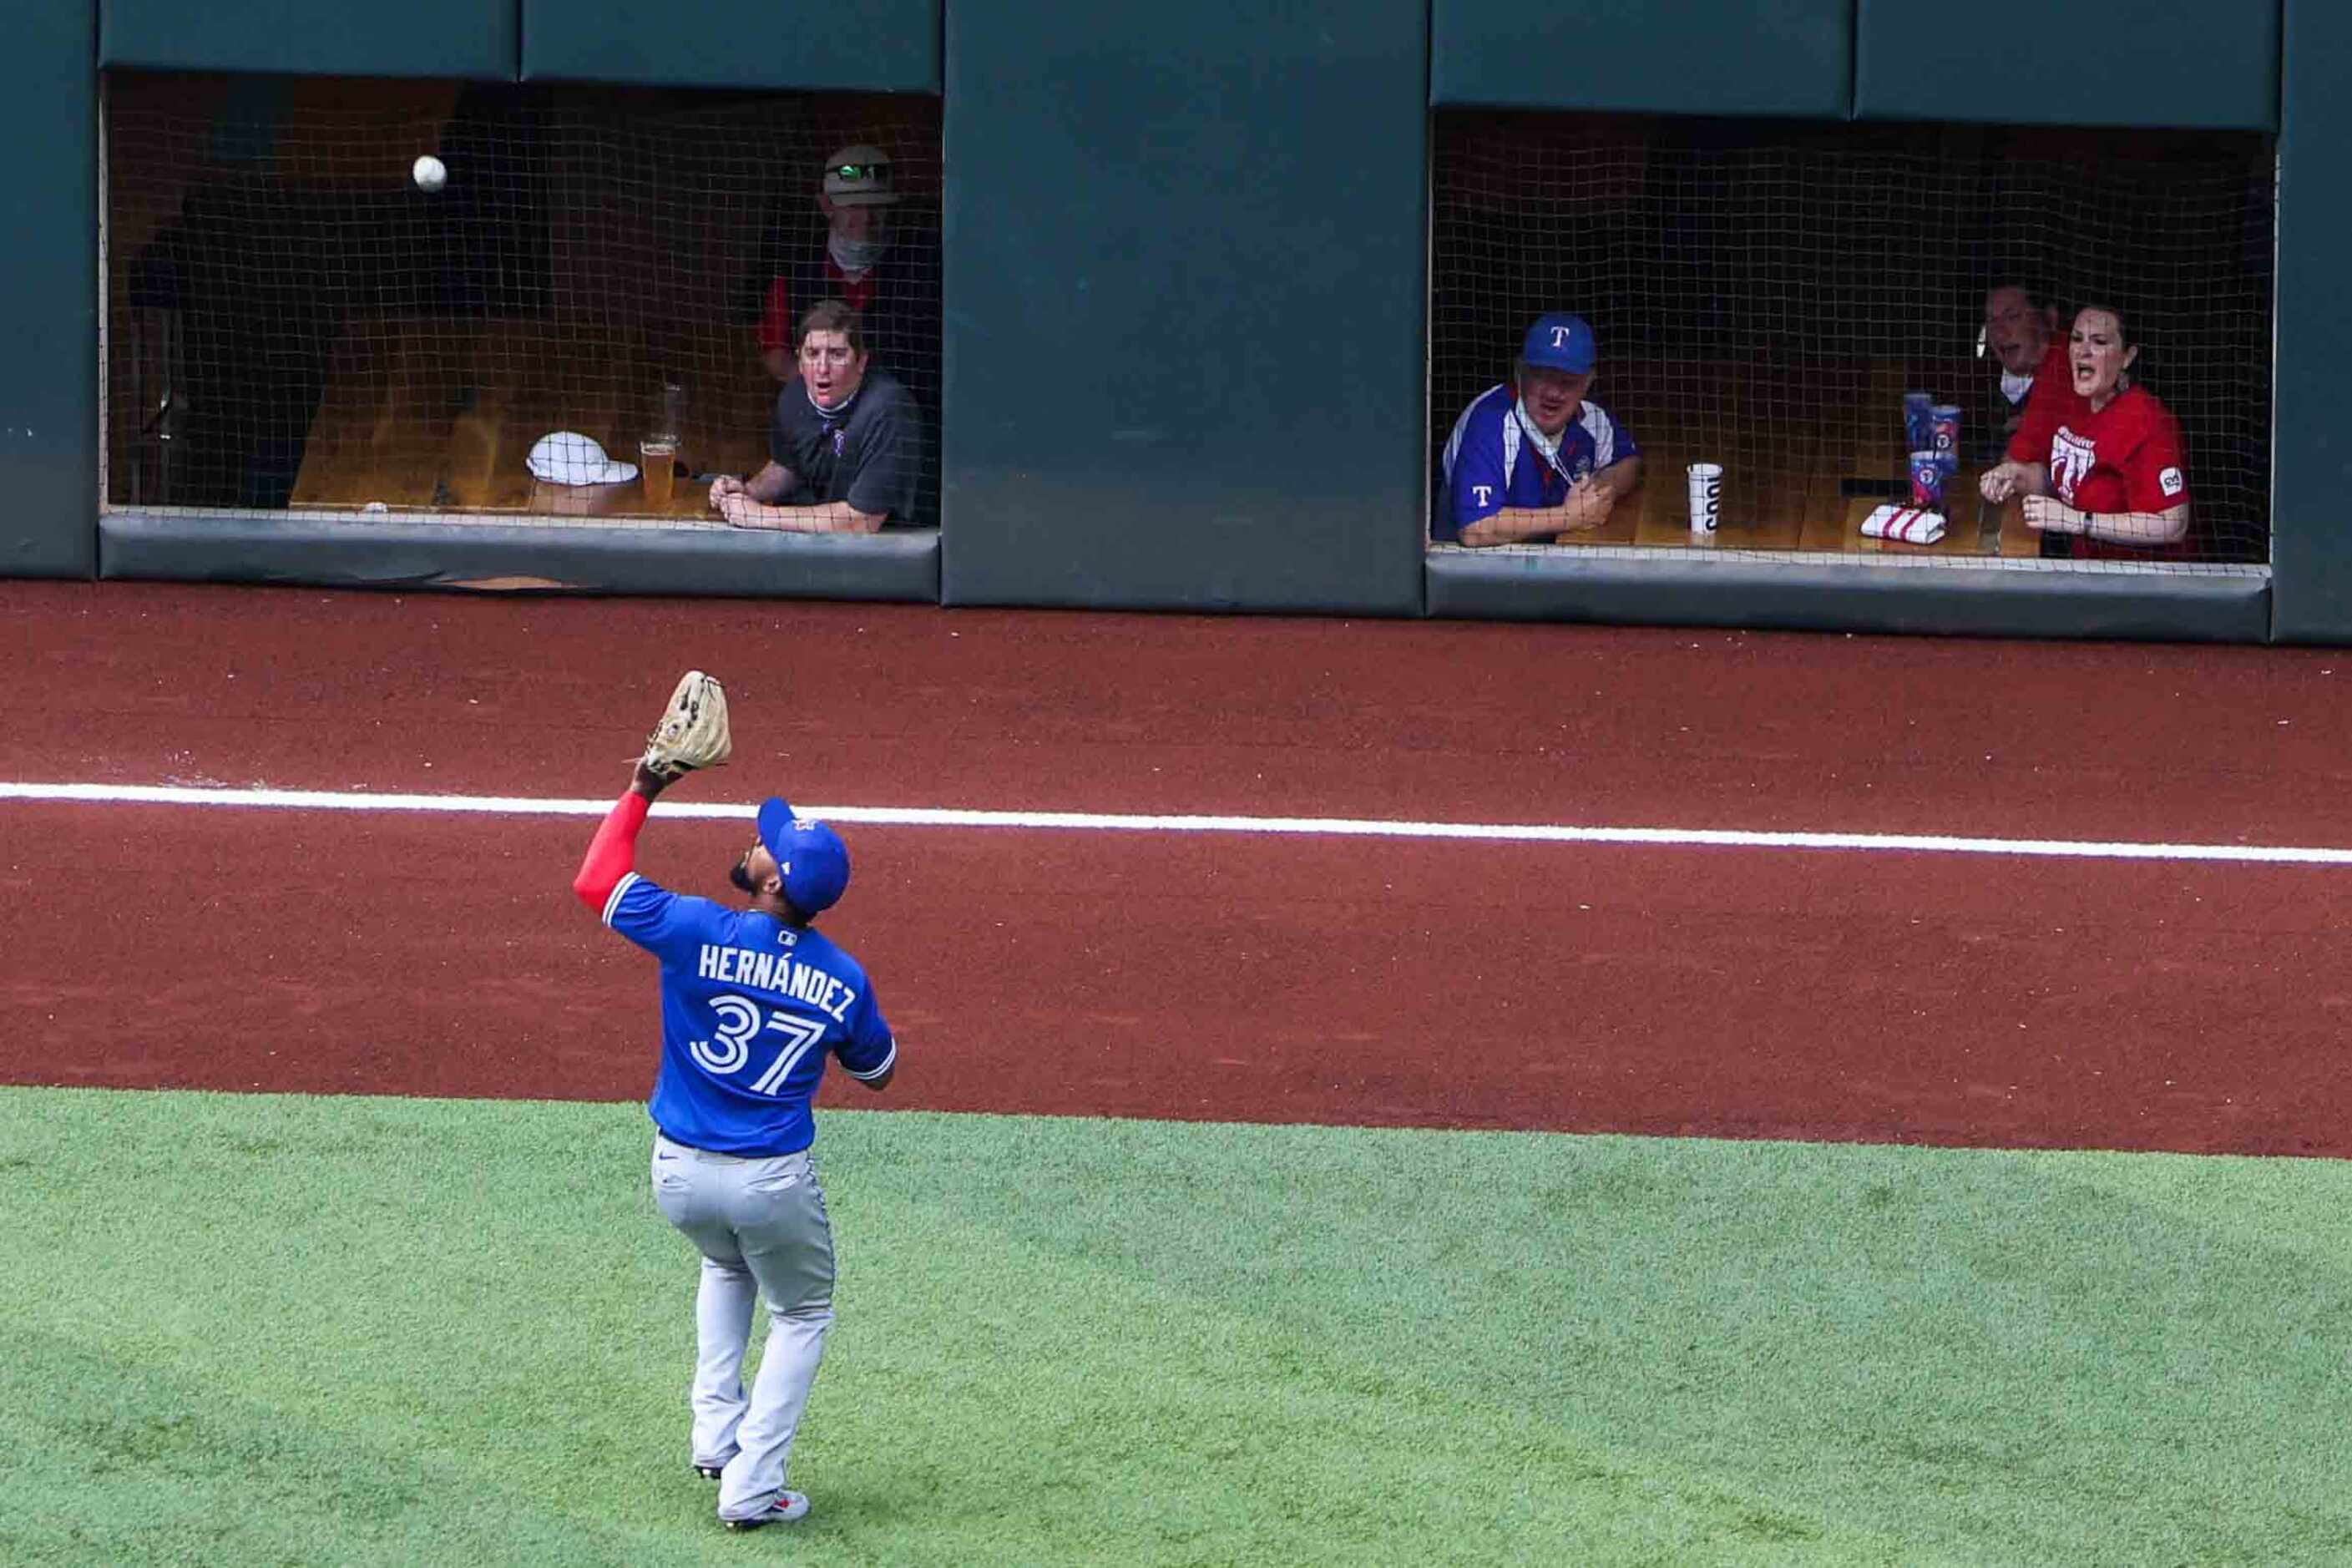 Toronto Blue Jays' outfielder Teoscar Hernandez No. 37 catches a fly ball at the Globe Life...